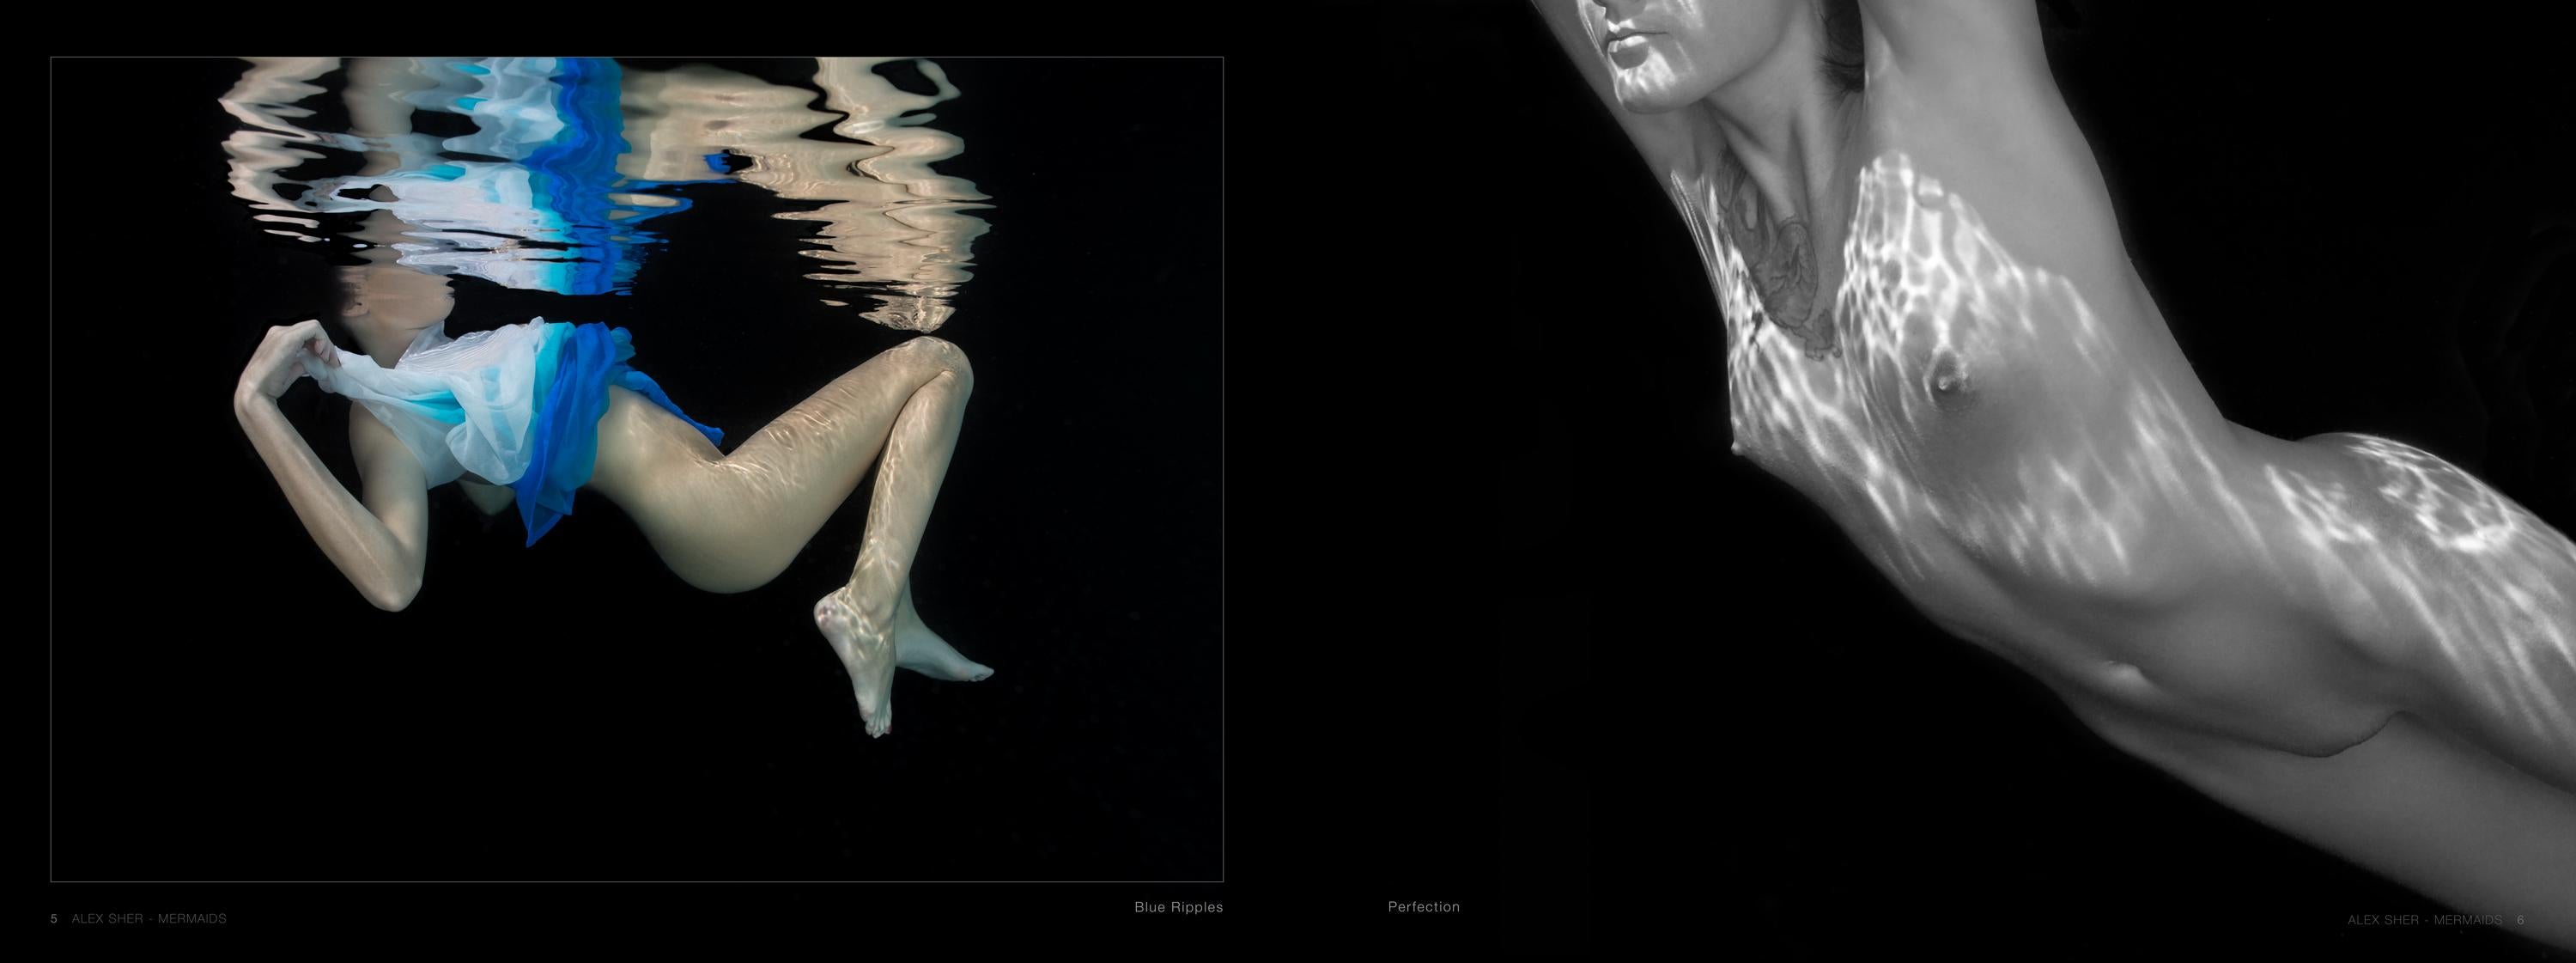 Mermaids -  a book of underwater nude and ocean wildlife photographs - Photorealist Photograph by Alex Sher